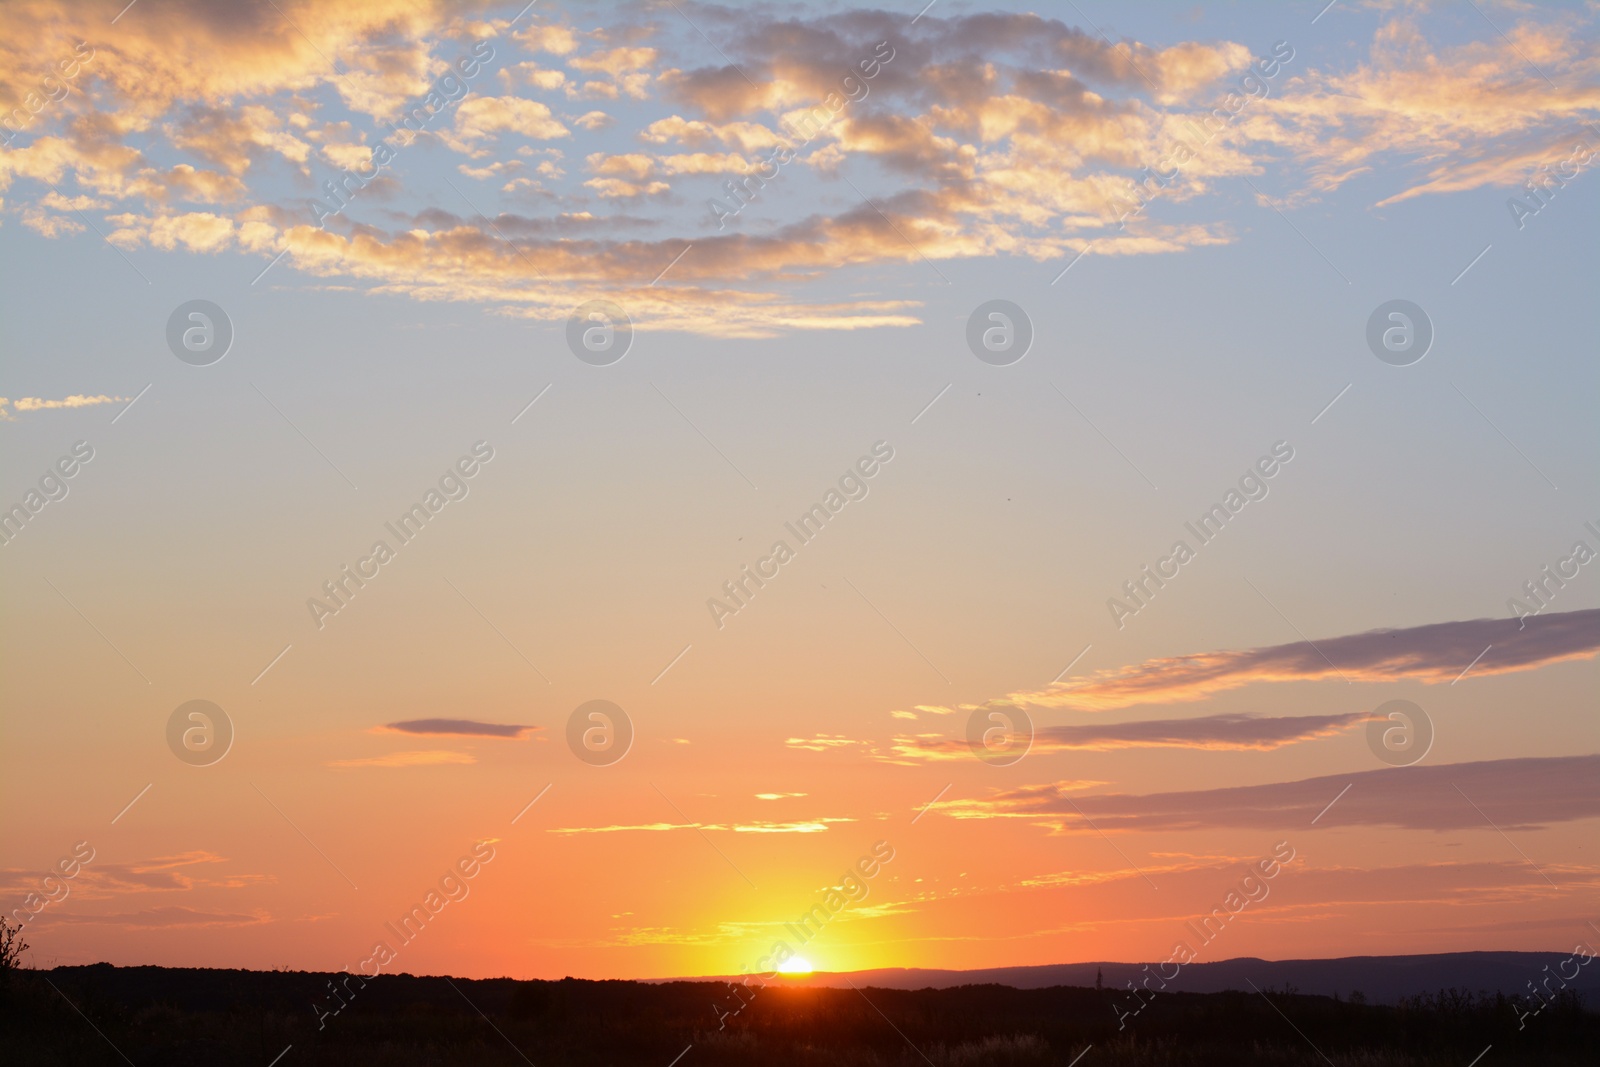 Photo of Picturesque view of landscape under beautiful evening sky with clouds at sunset